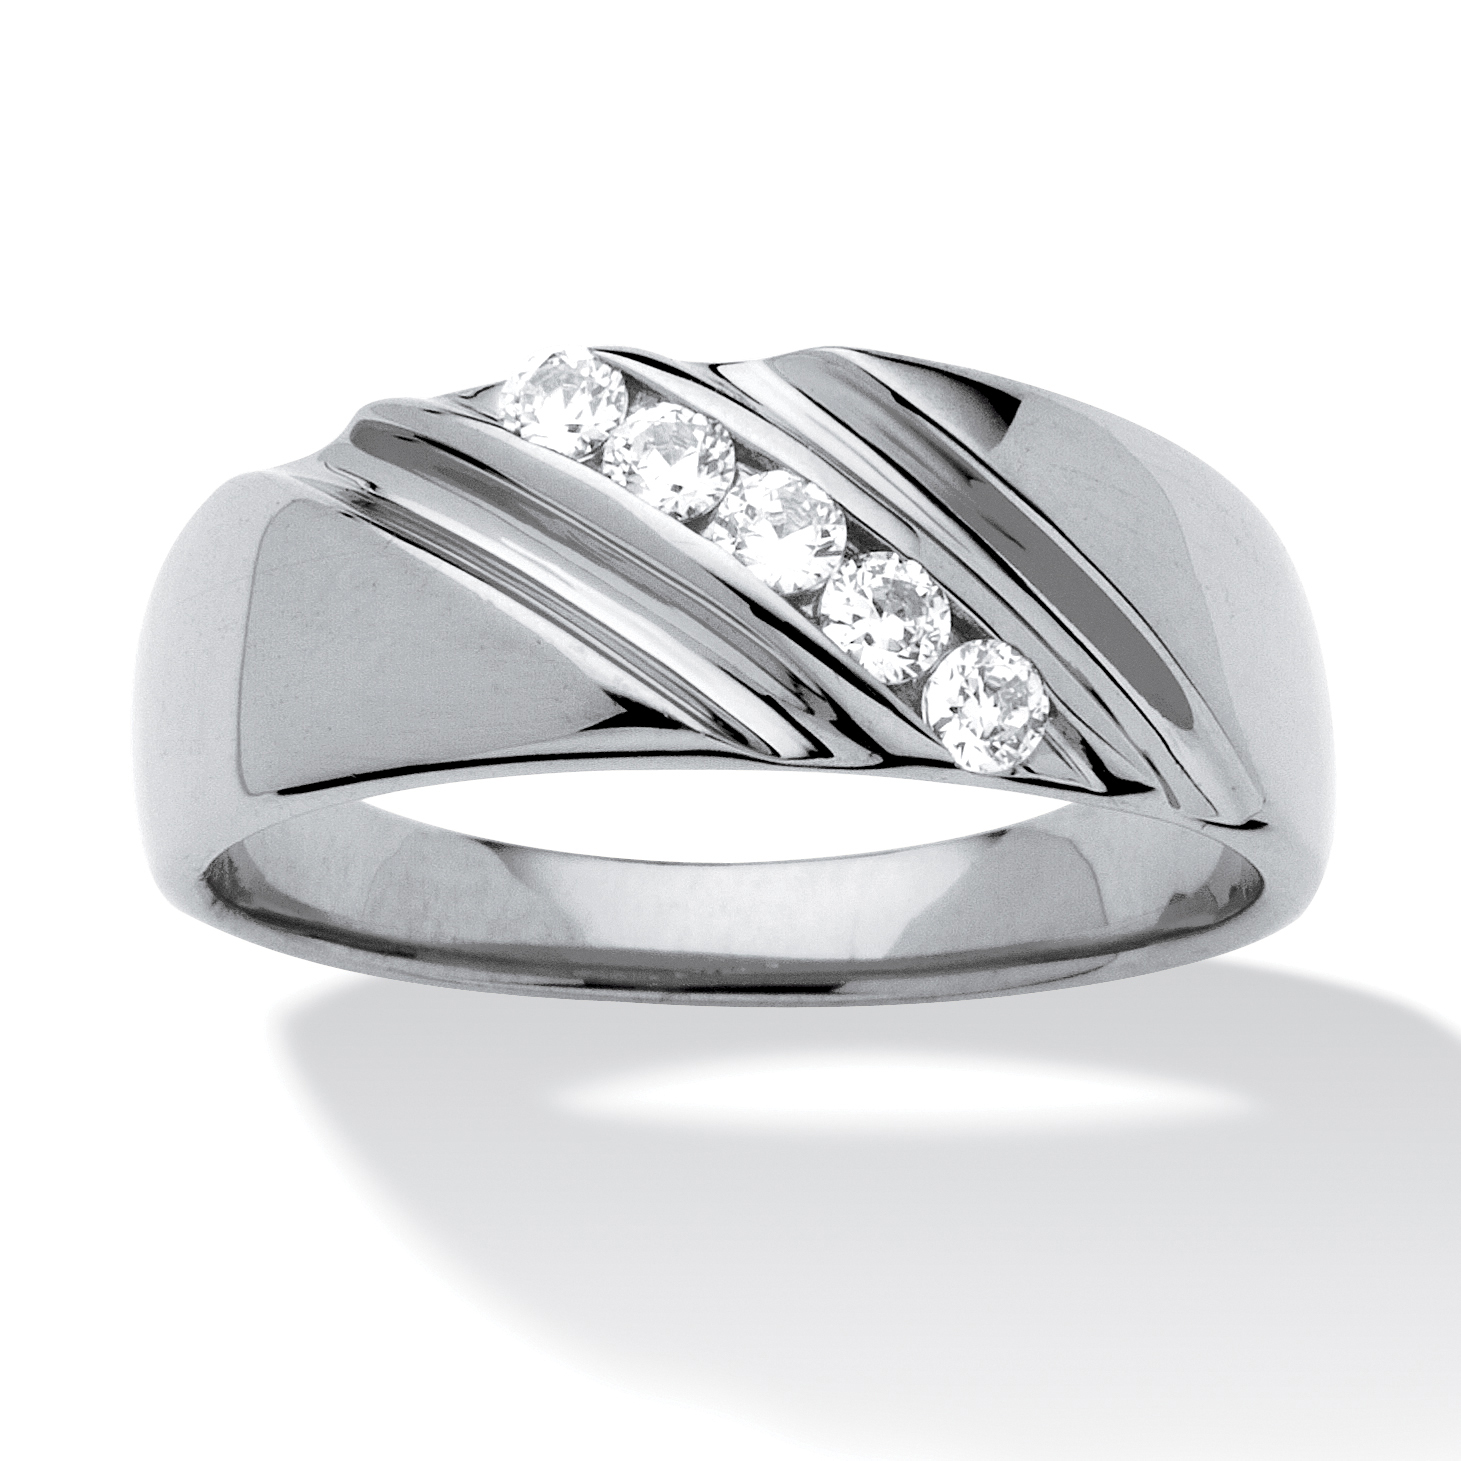 PalmBeach Jewelry Men's .50 TCW Round Cubic Zirconia Diagonal Ring In Platinum-plated Sterling Silver